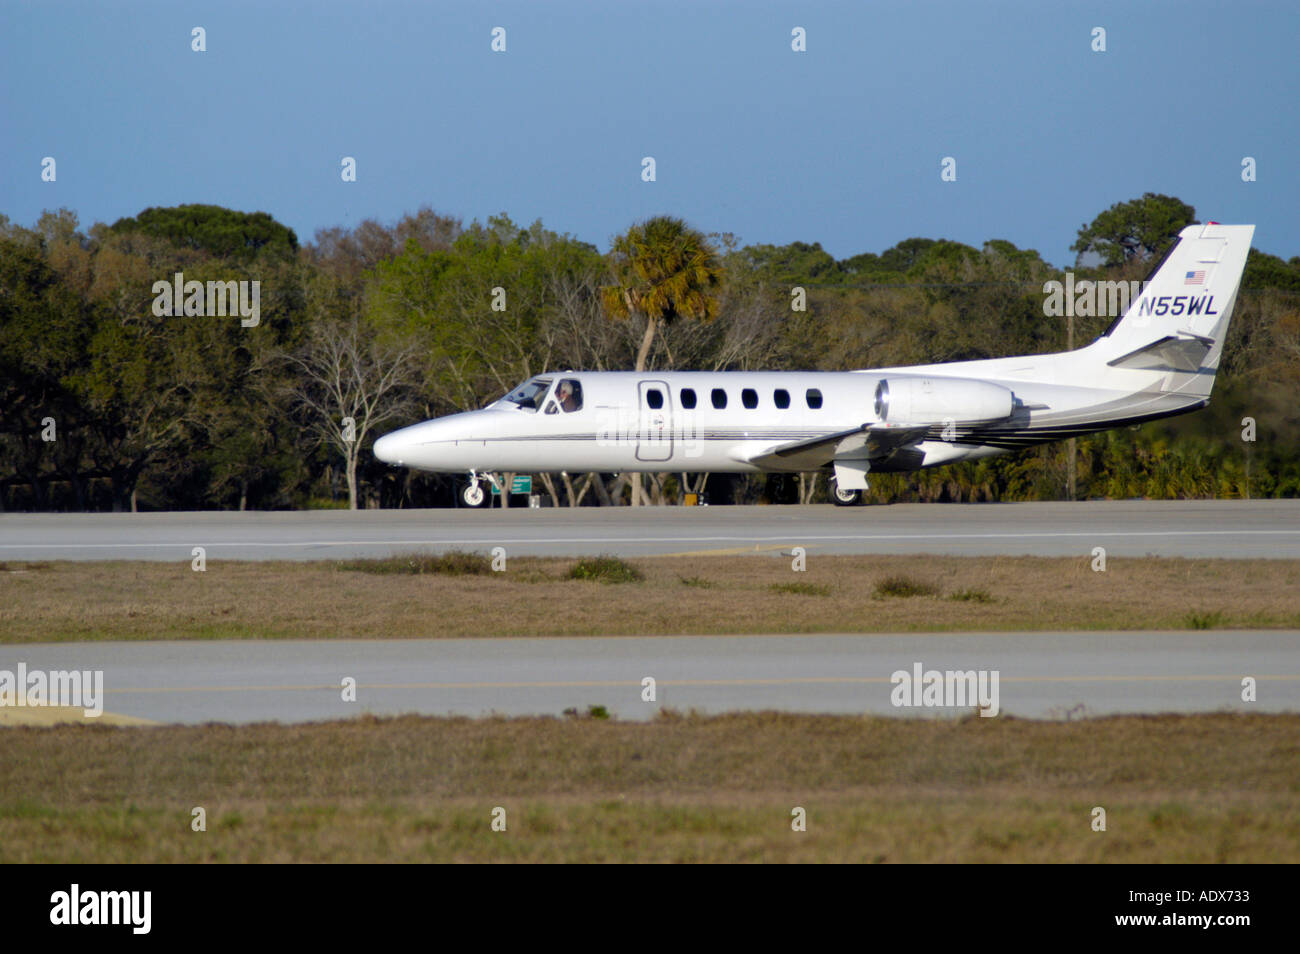 Airplane in the air Cessna Citation Stock Photo